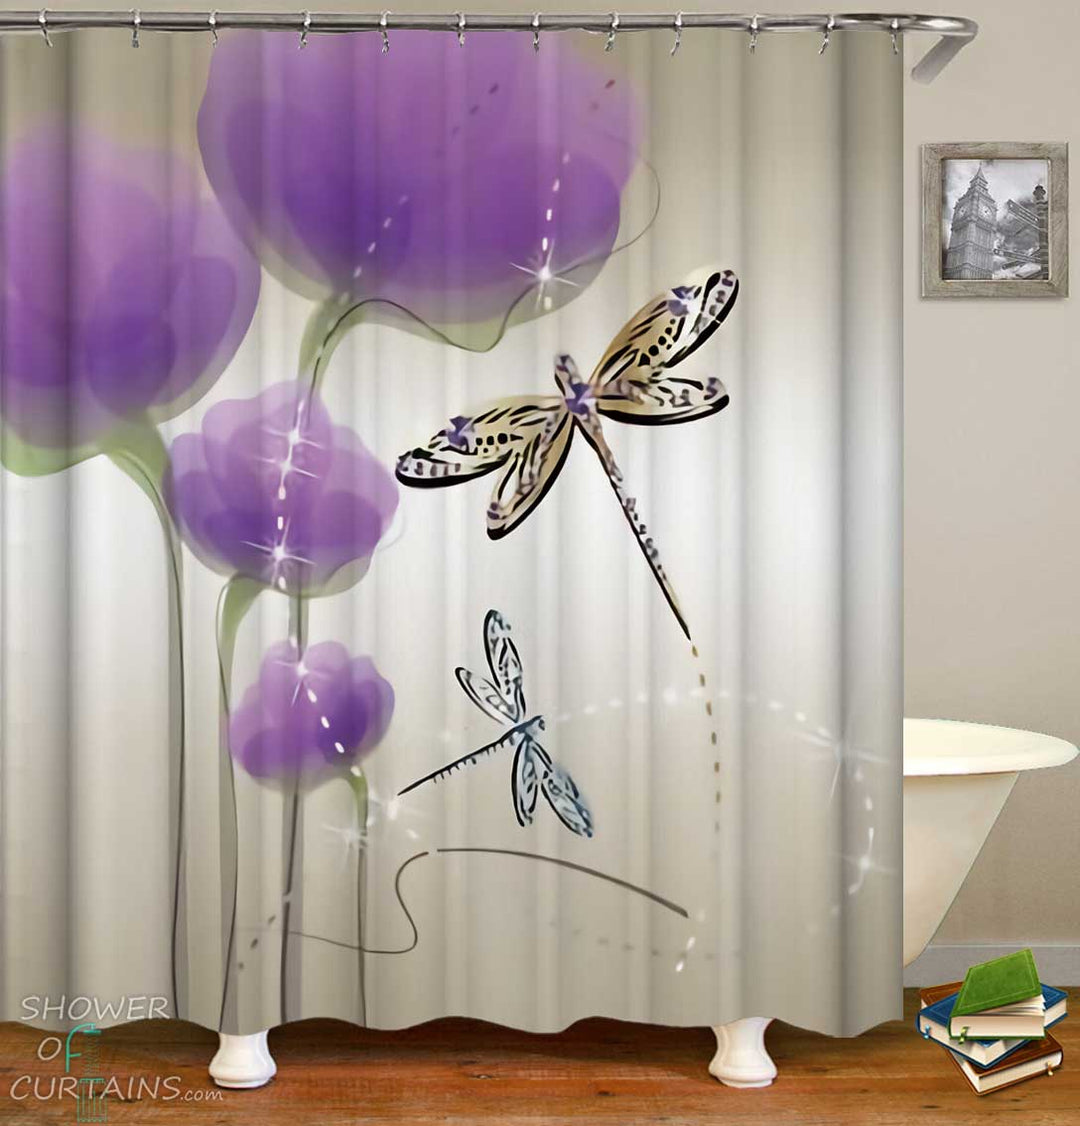 Shower Curtains with Purple Flowers and Dragonflies